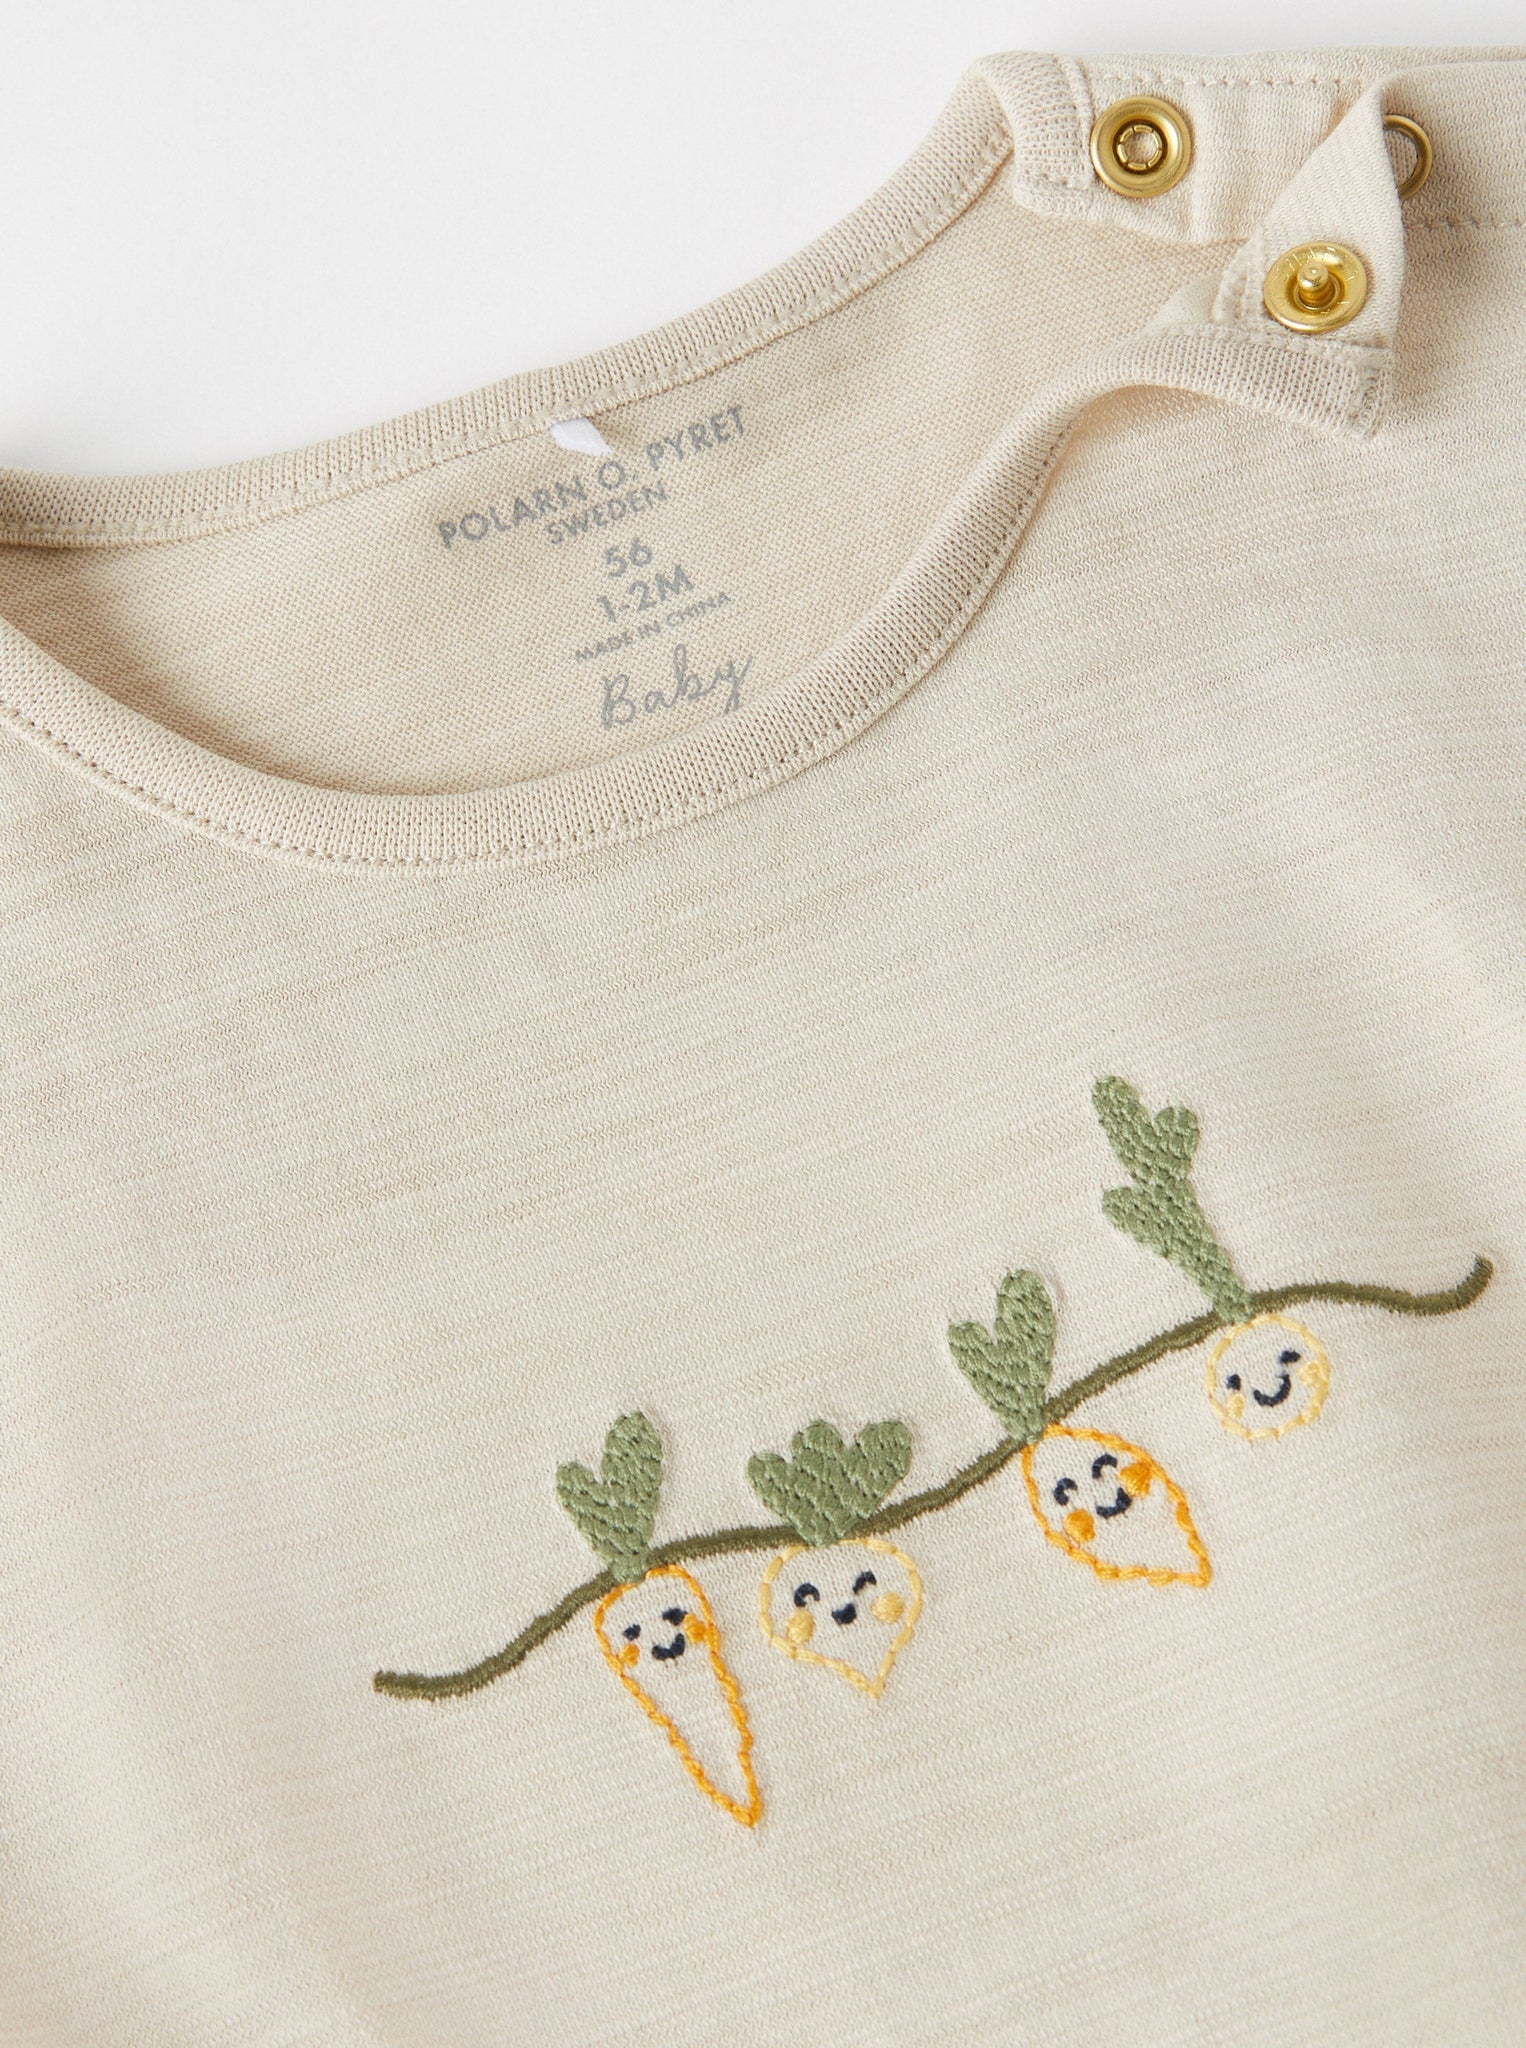 Vegetable Embroidered Babygrow